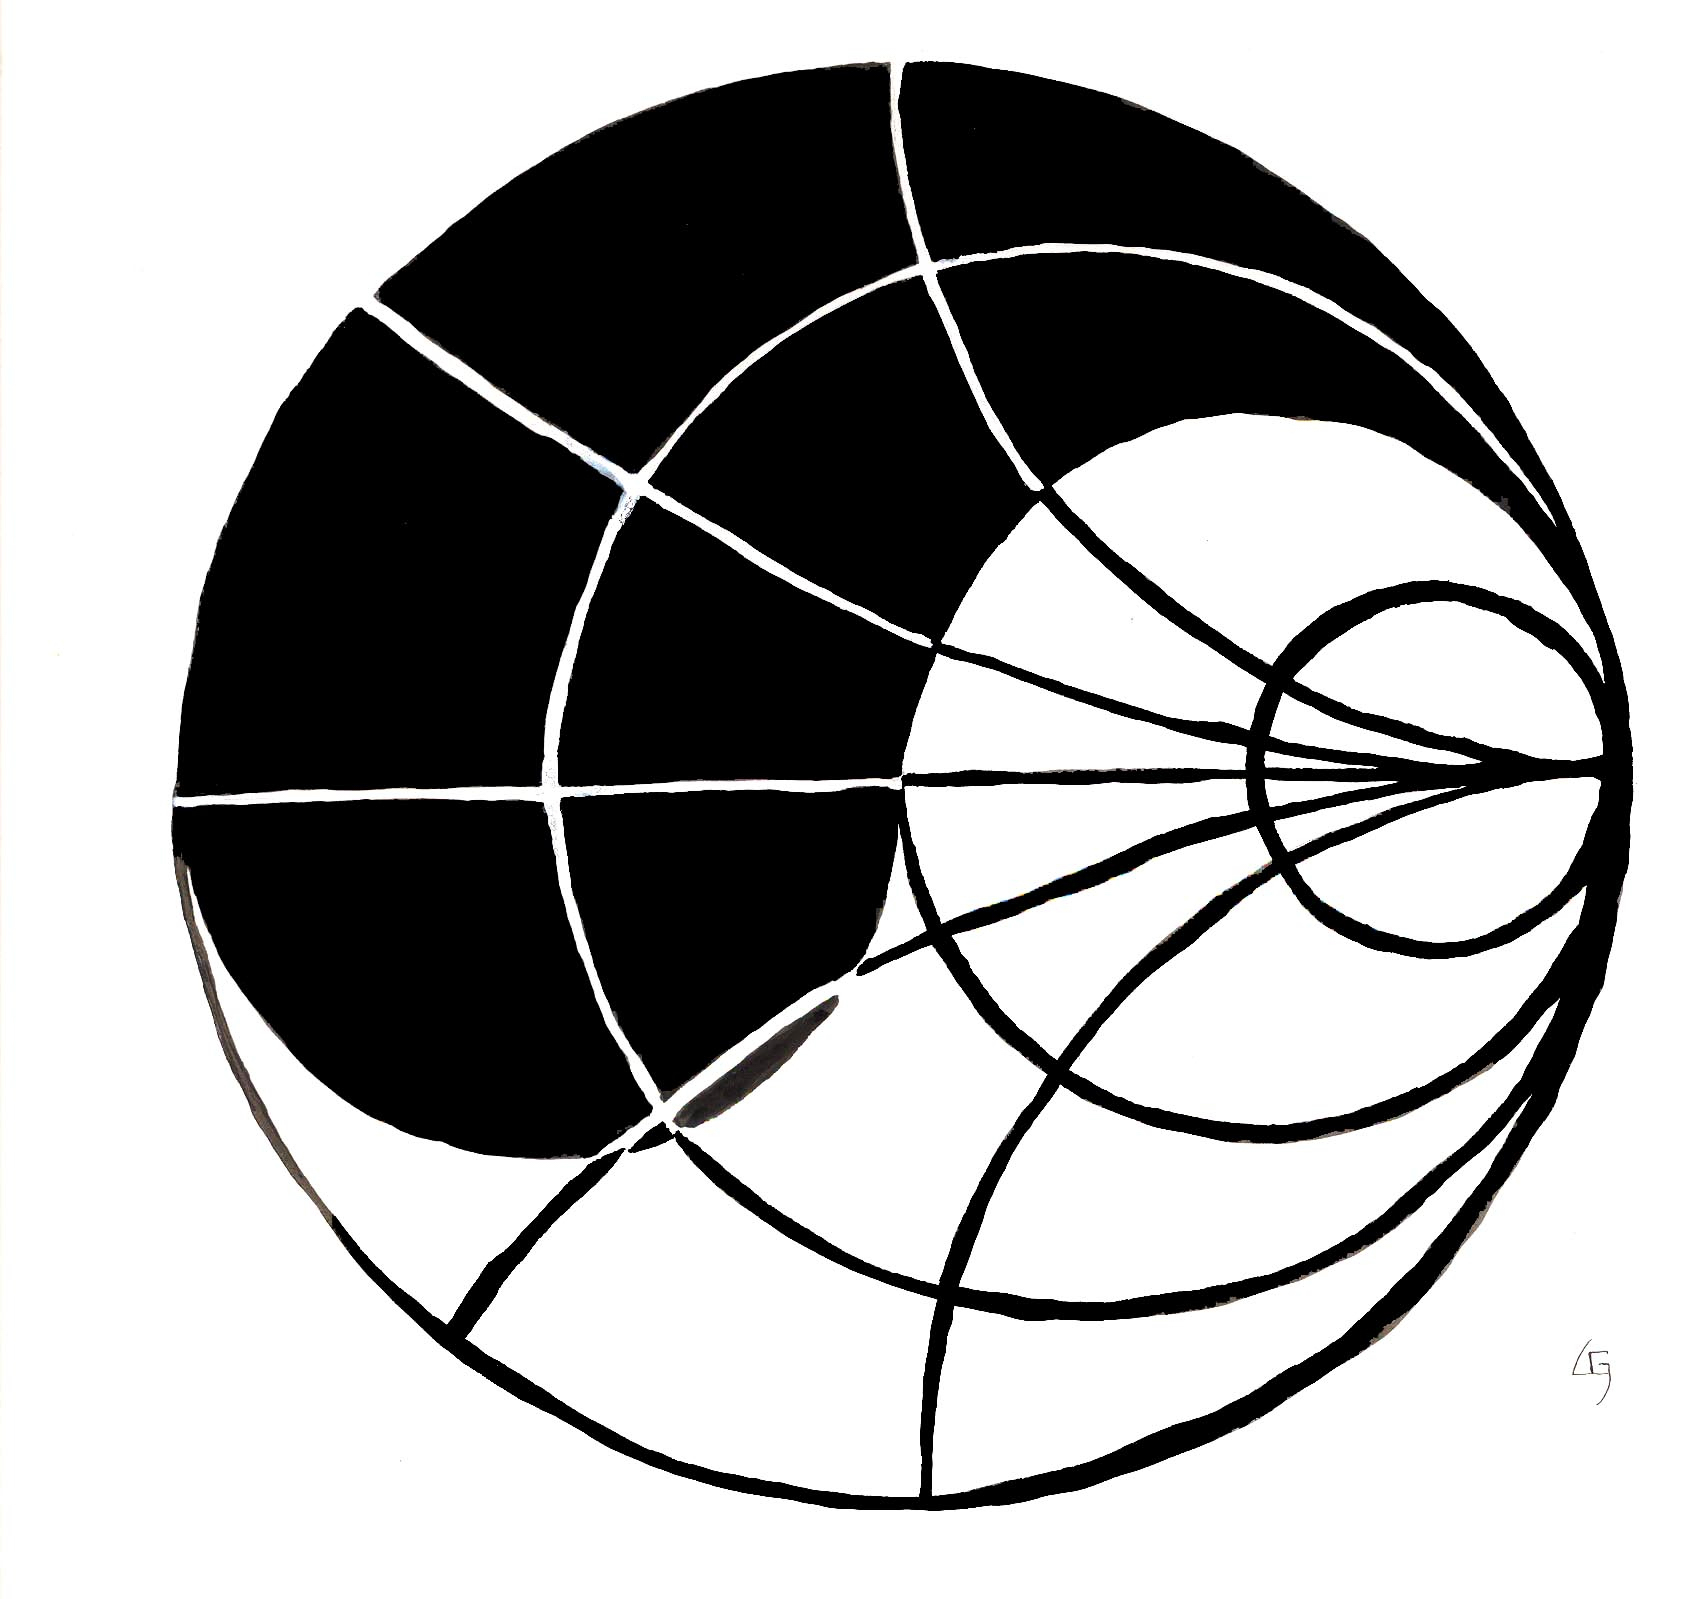 Yin Yang Smith Chart in India ink